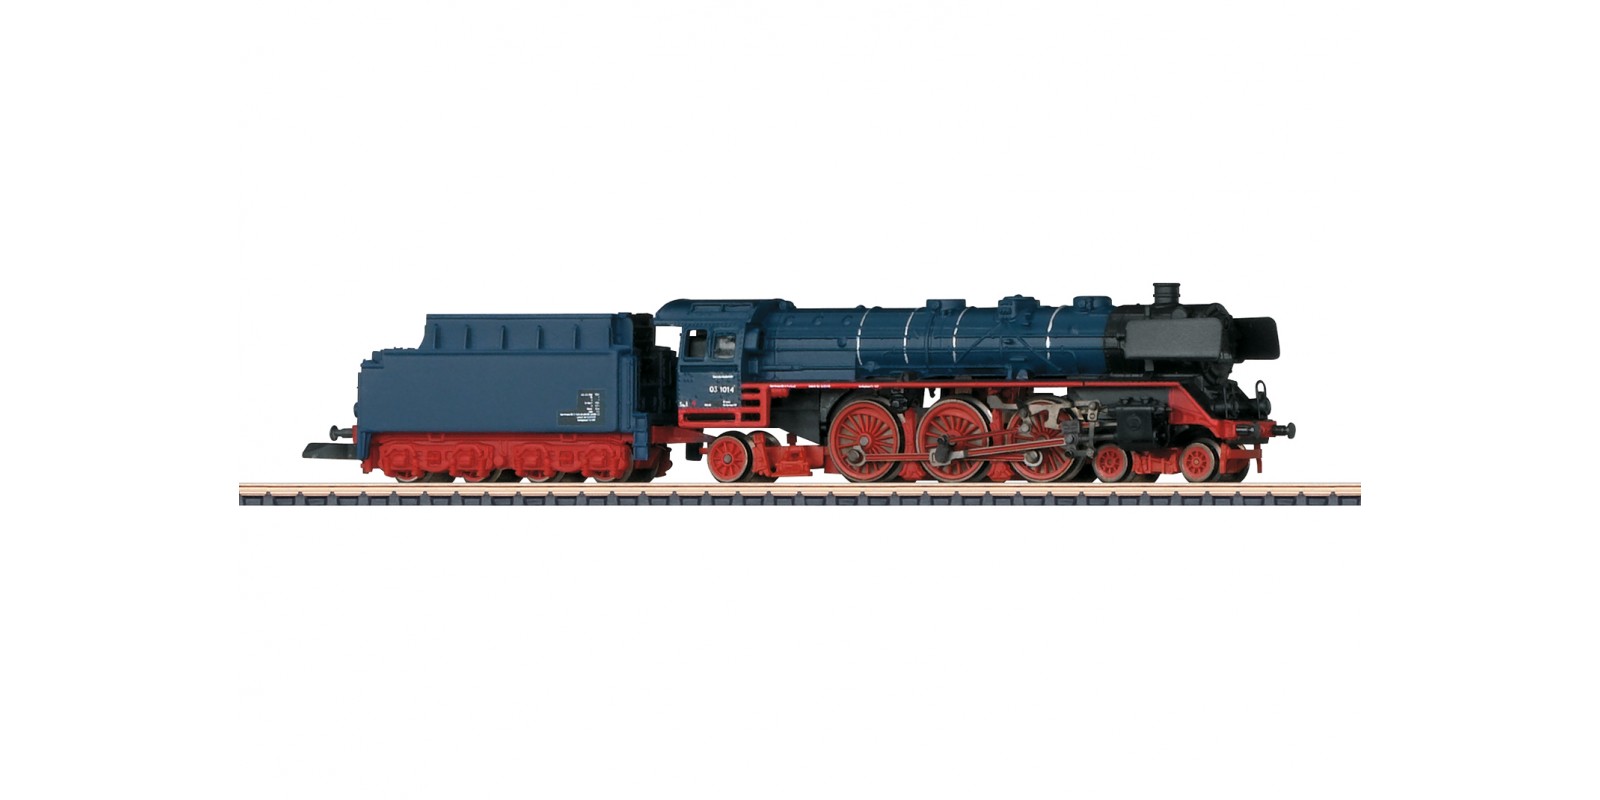 88856 Class 03.10 Express Locomotive with a Tender